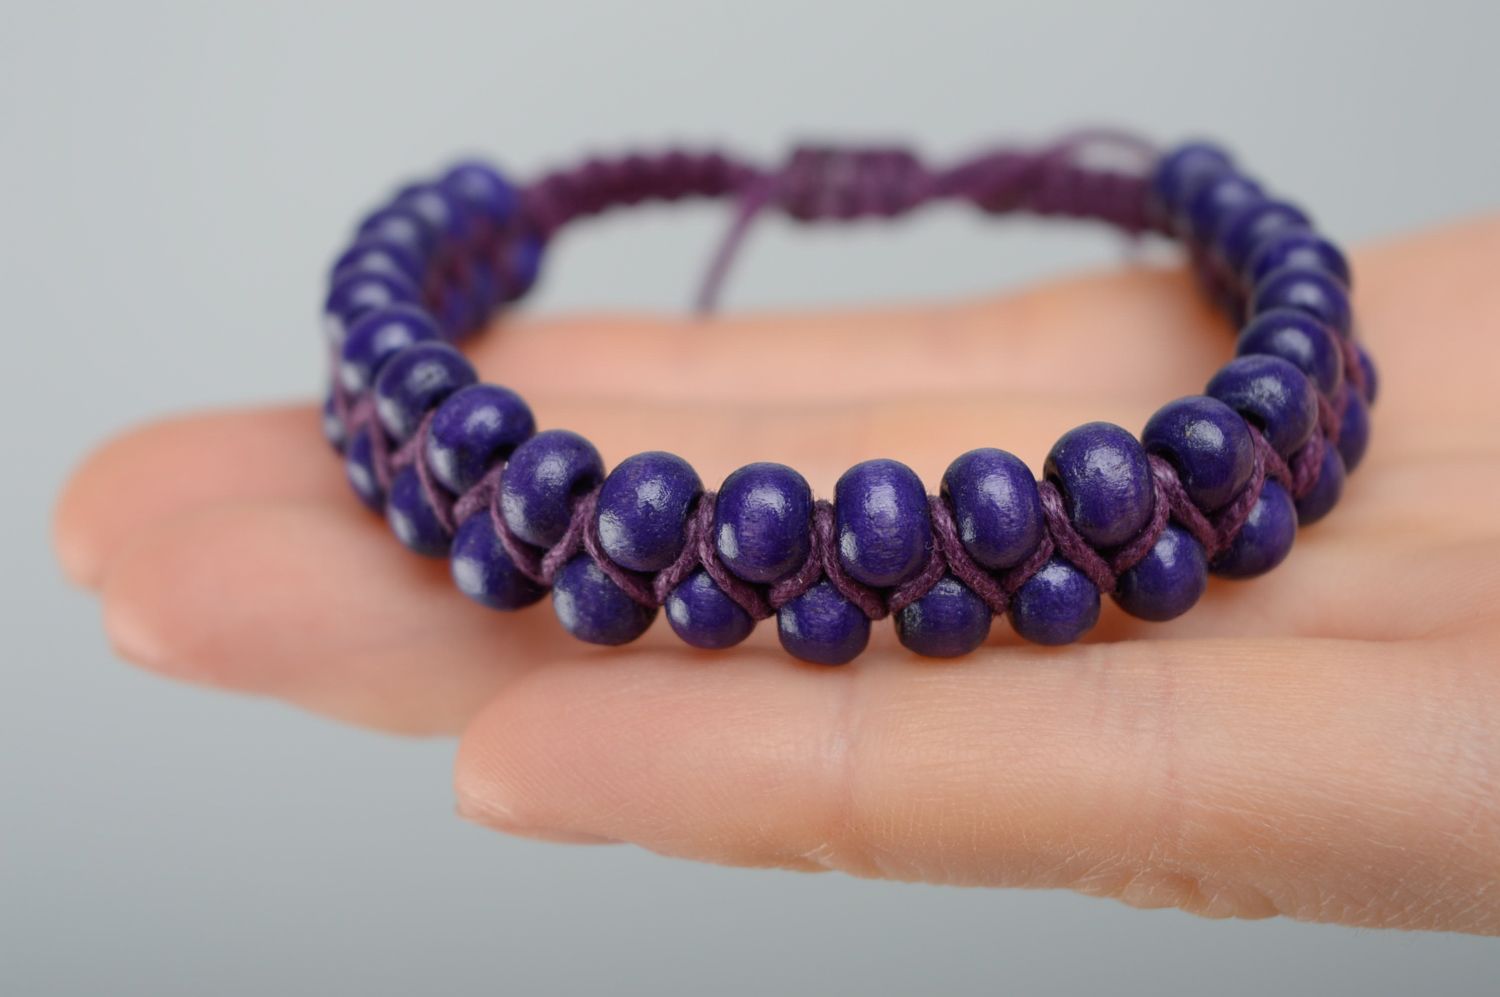 Violet macrame bracelet made of waxed cord and wooden beads photo 3